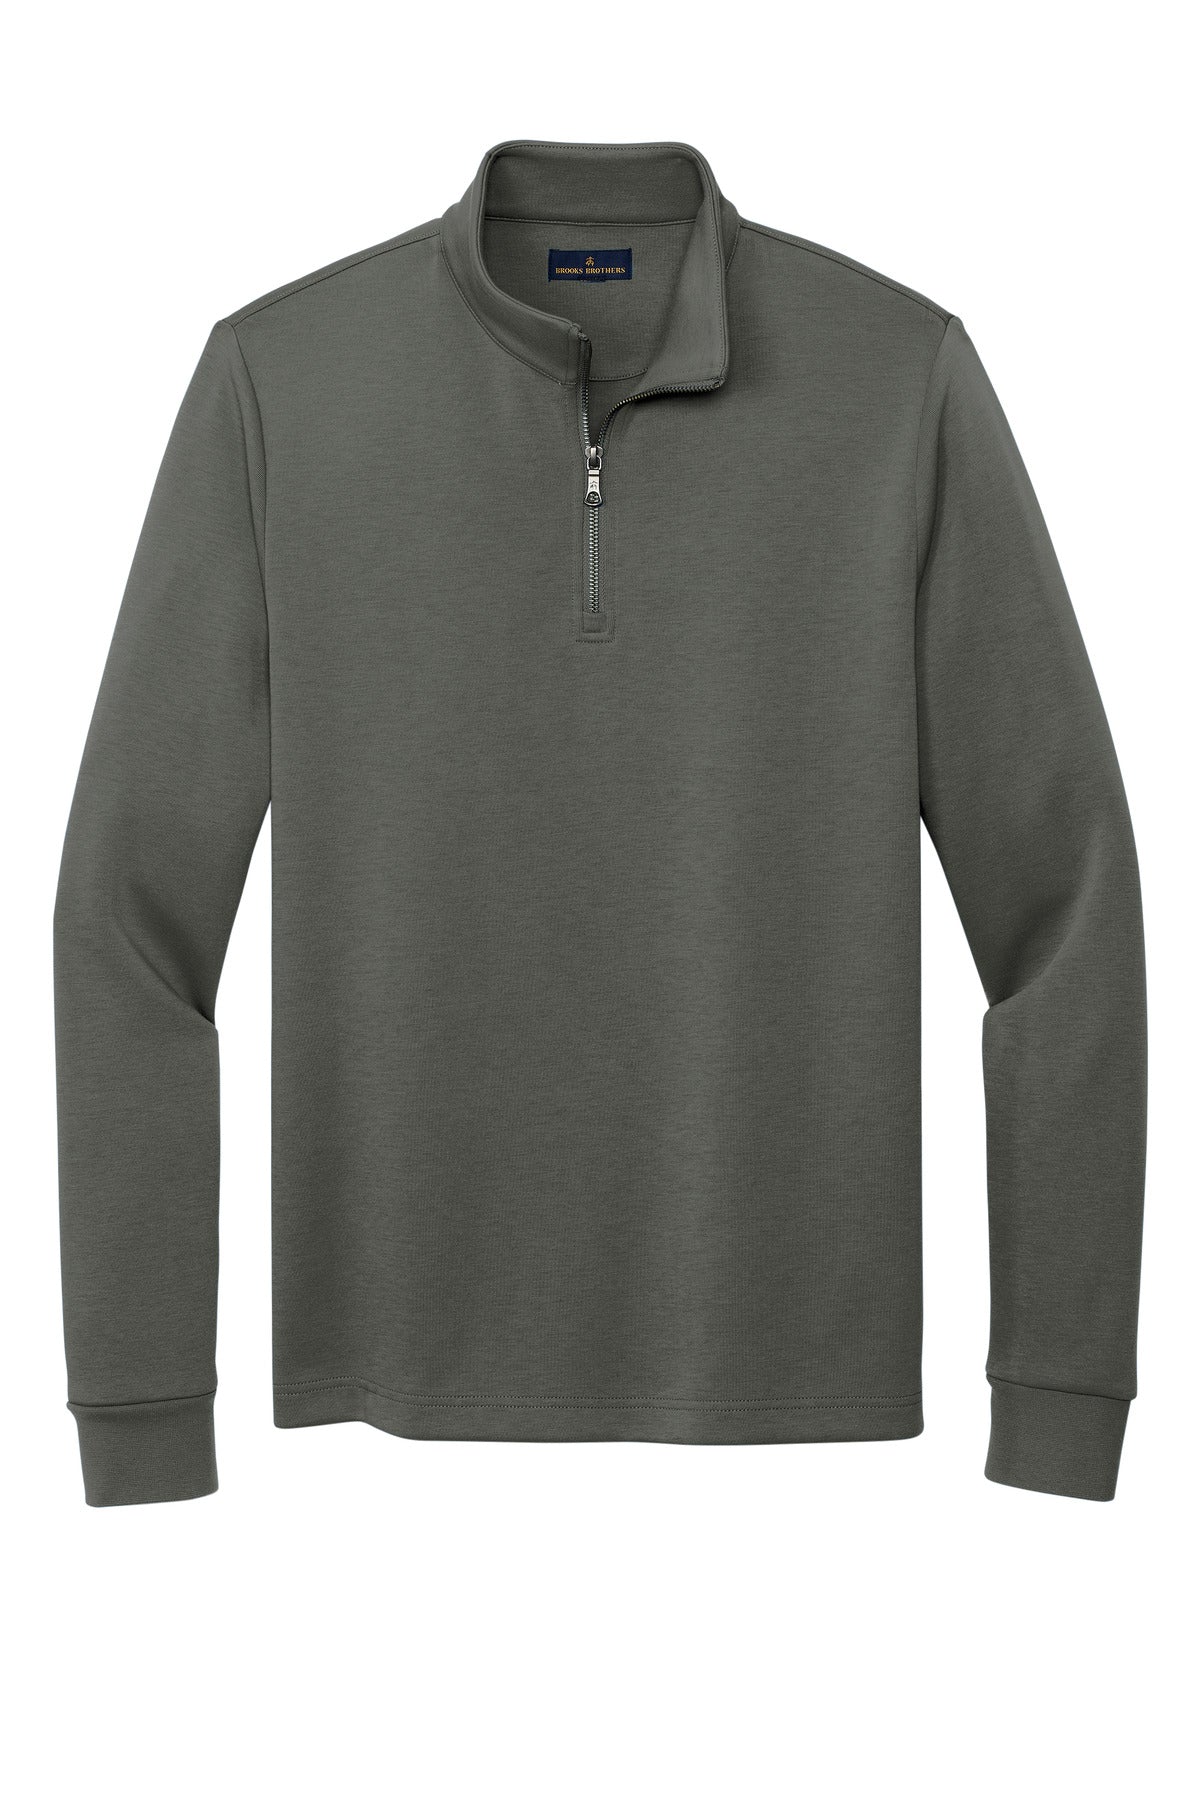 Brooks Brothers Double-Knit 1/4-Zip